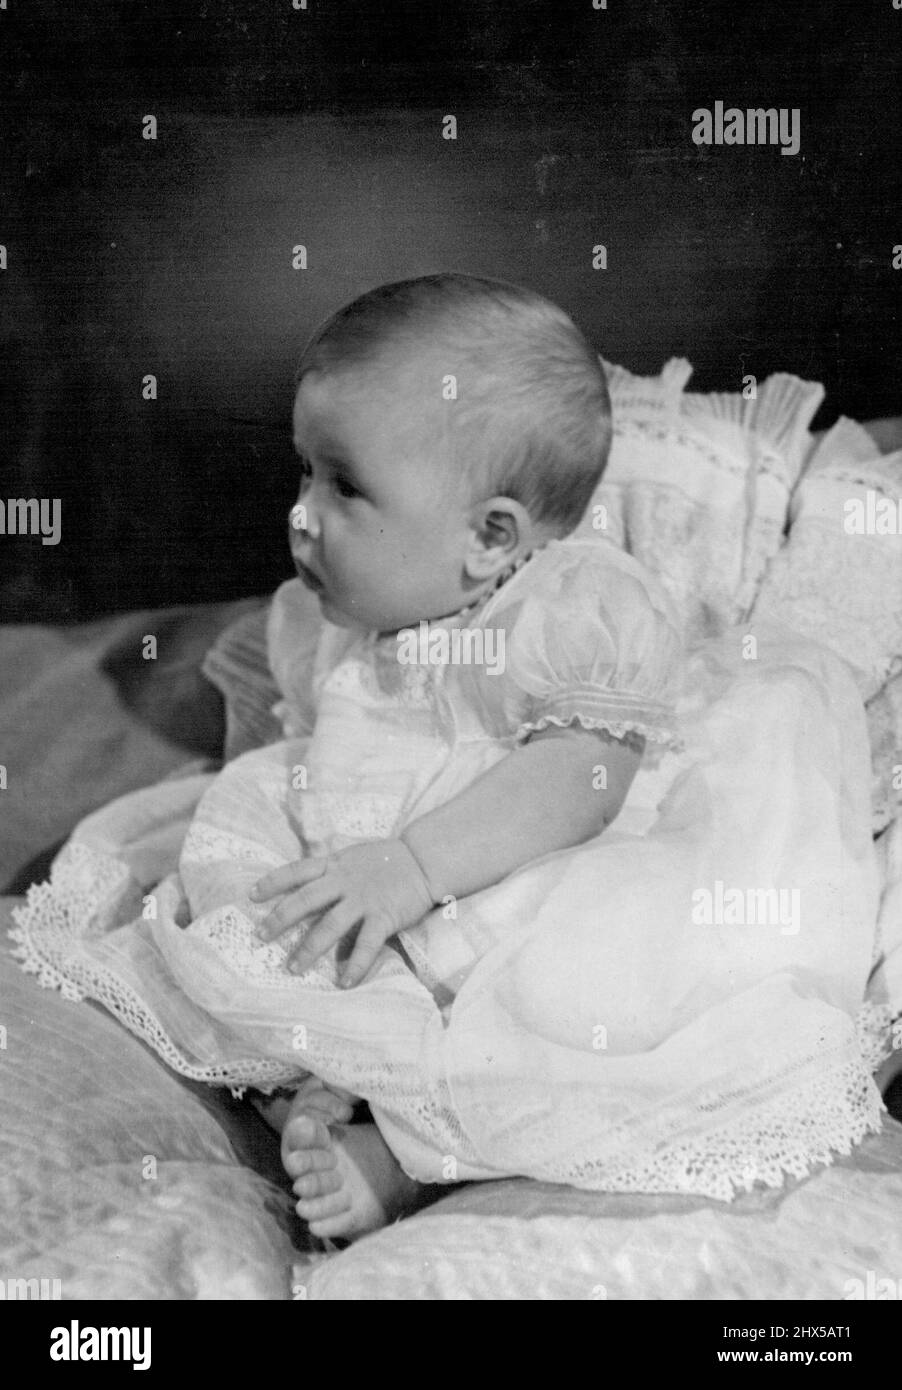 H.R.H. Prince Charles - Latest Photographs. Taken by Royal Command, picture shows H.R.H. Prince Charles at Buckingham Palace. The fair-haired, blue-eyed infant Prince was 19 weeks when photographed, weighing 16 lbs. 2 ozs. April 6, 1949. (Photo by Baron, Camera Press). Stock Photo